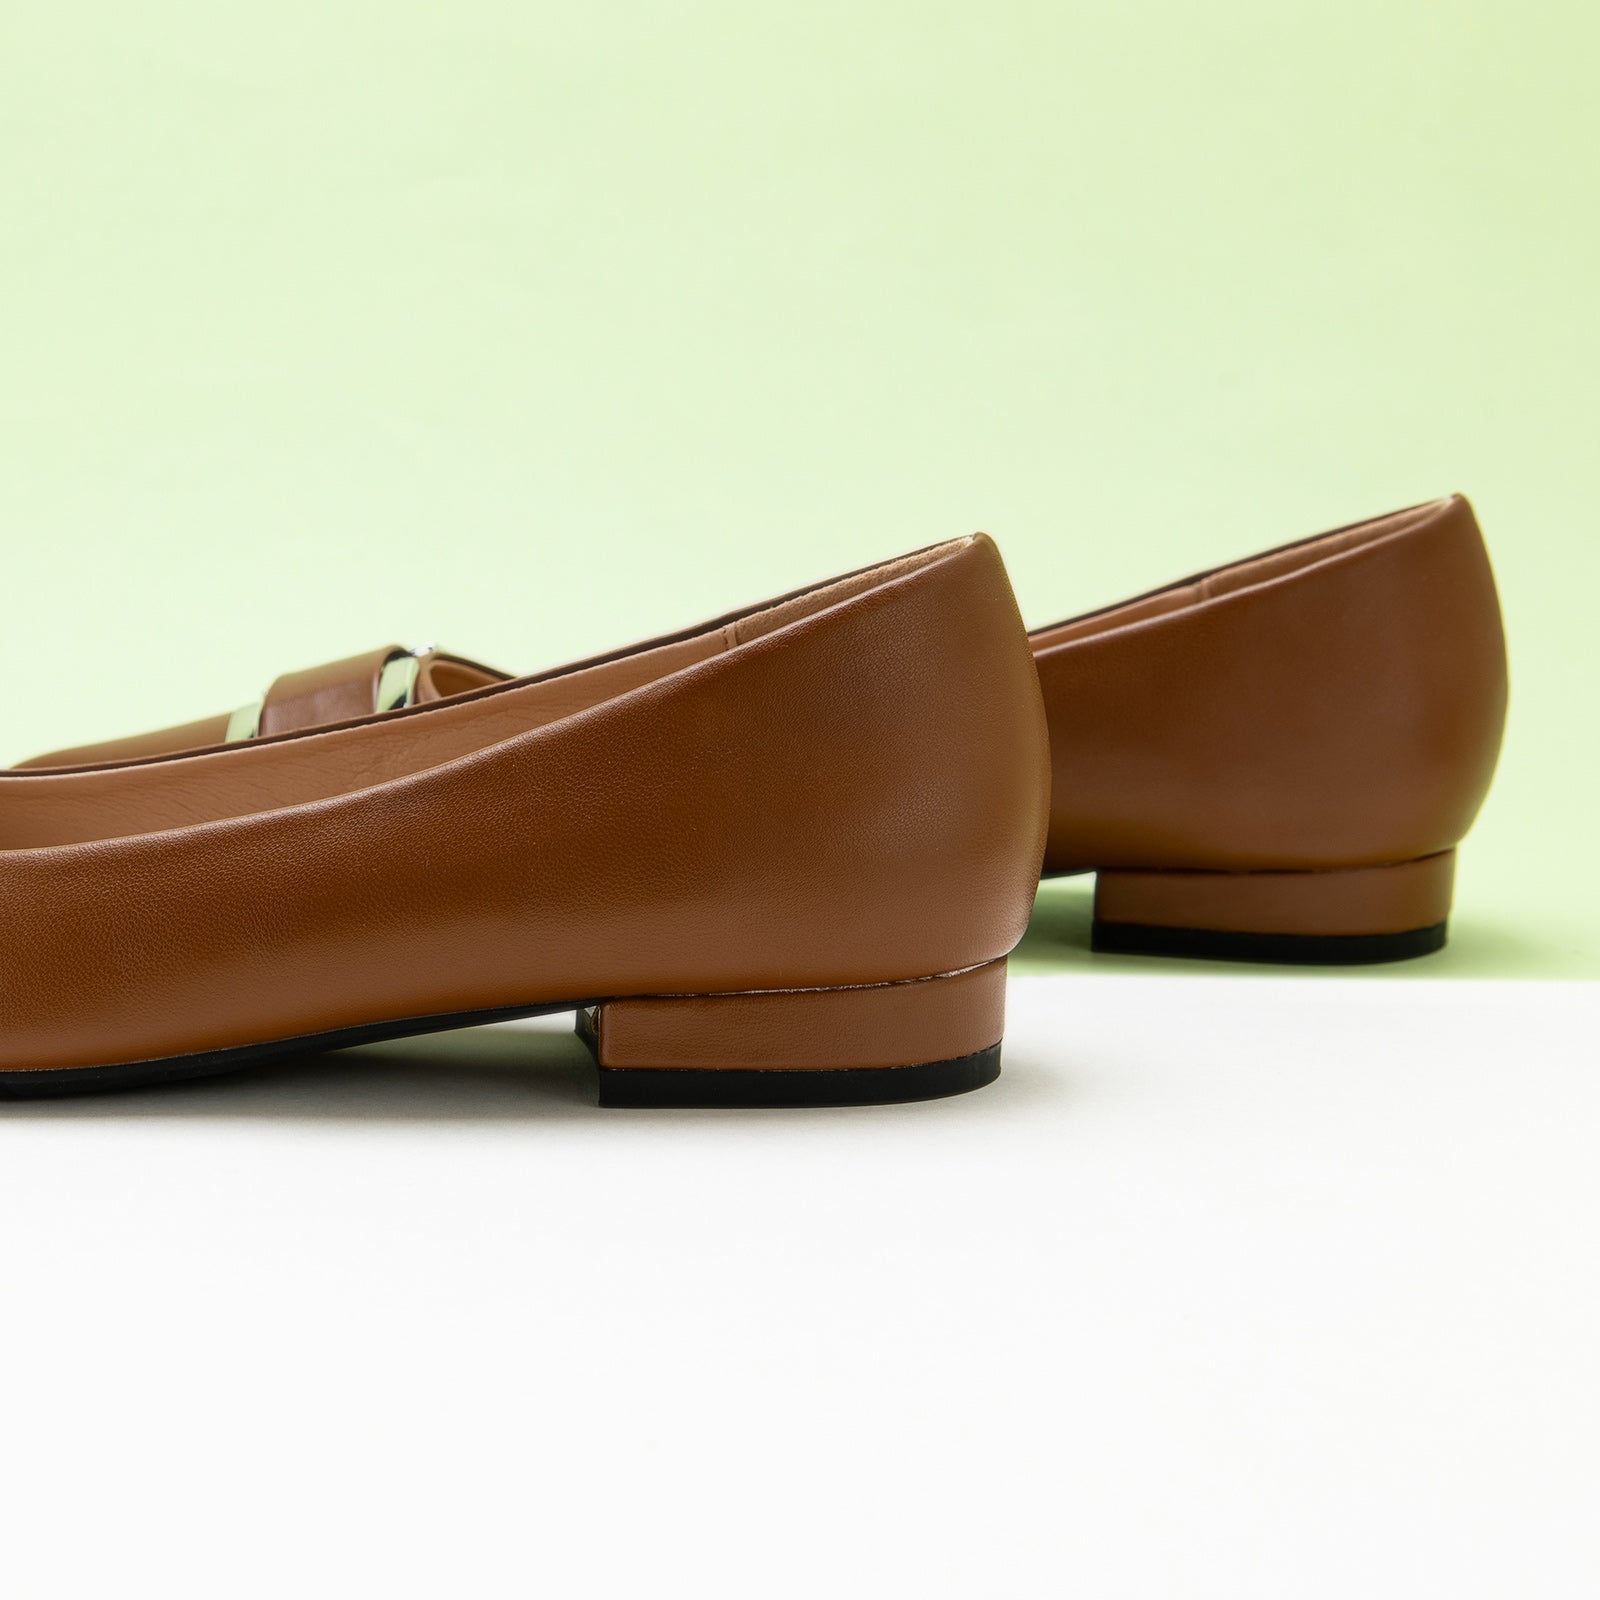 Brown Soft Leather Flats with a Metal Buckle and Pointed Toe, a versatile and comfortable option for everyday wear with a touch of sophistication